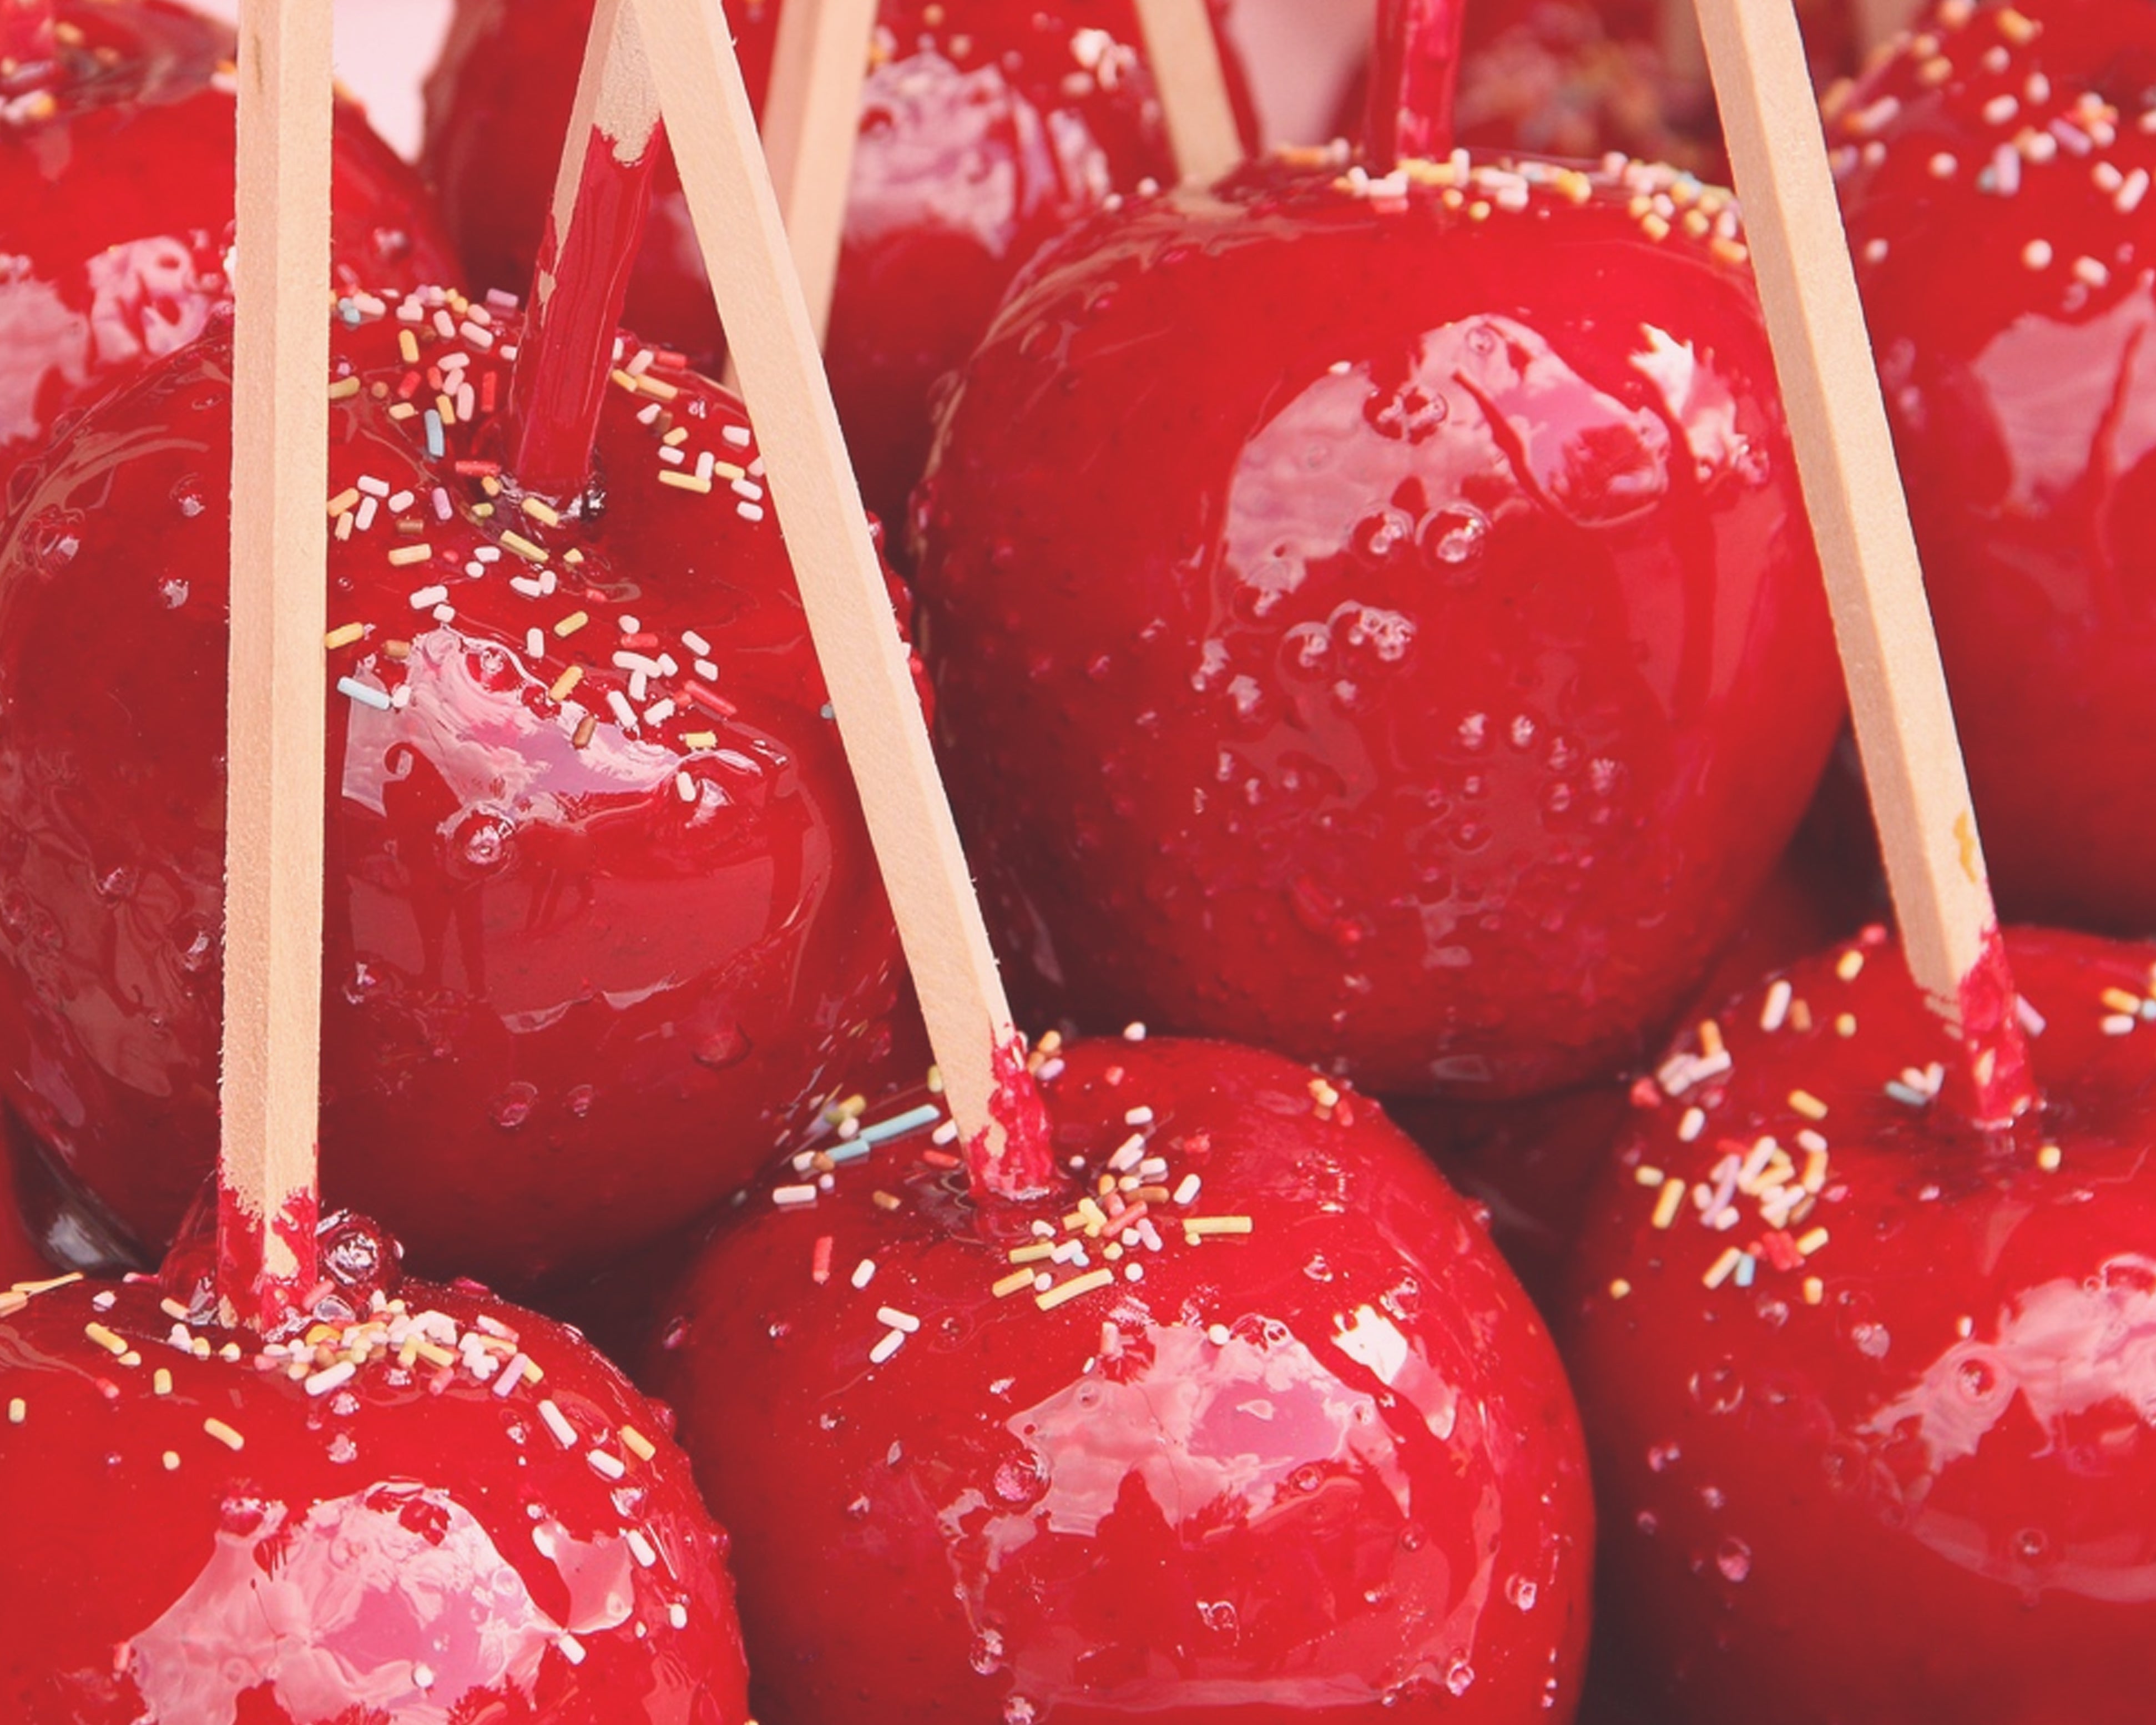 Toffee Apples - A1 EQUIPMENT